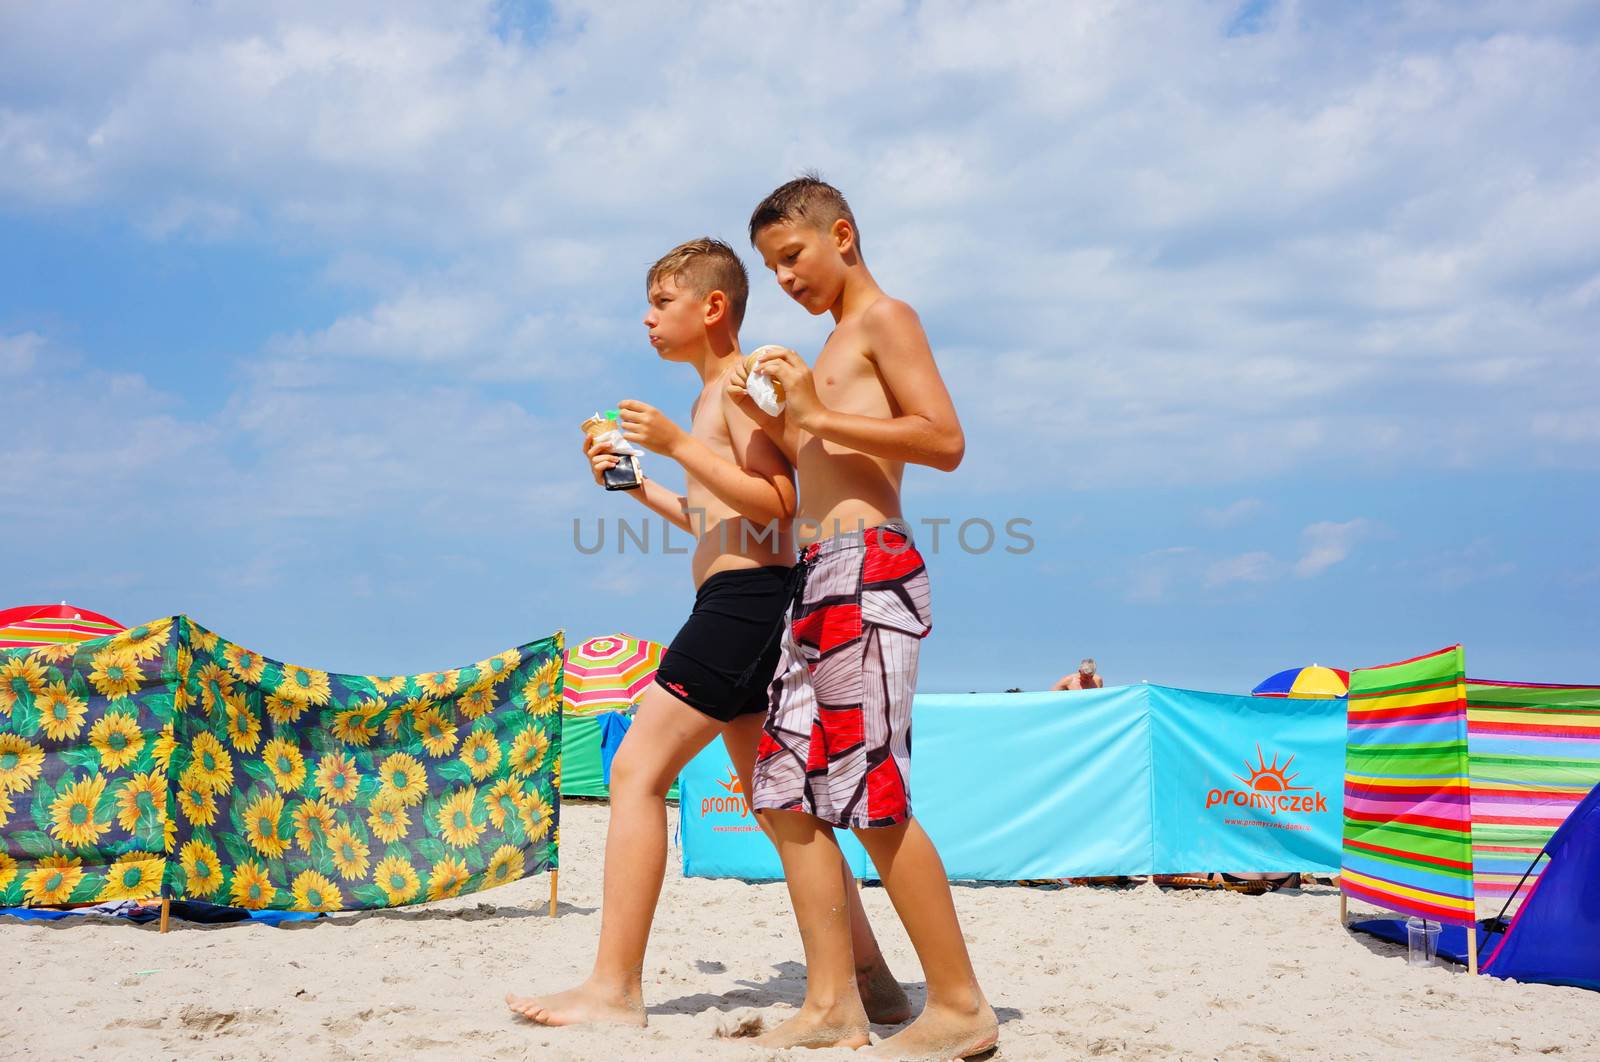 SIANOZETY, POLAND - JULY 22, 2015: Two boys walking on sand at a beach 